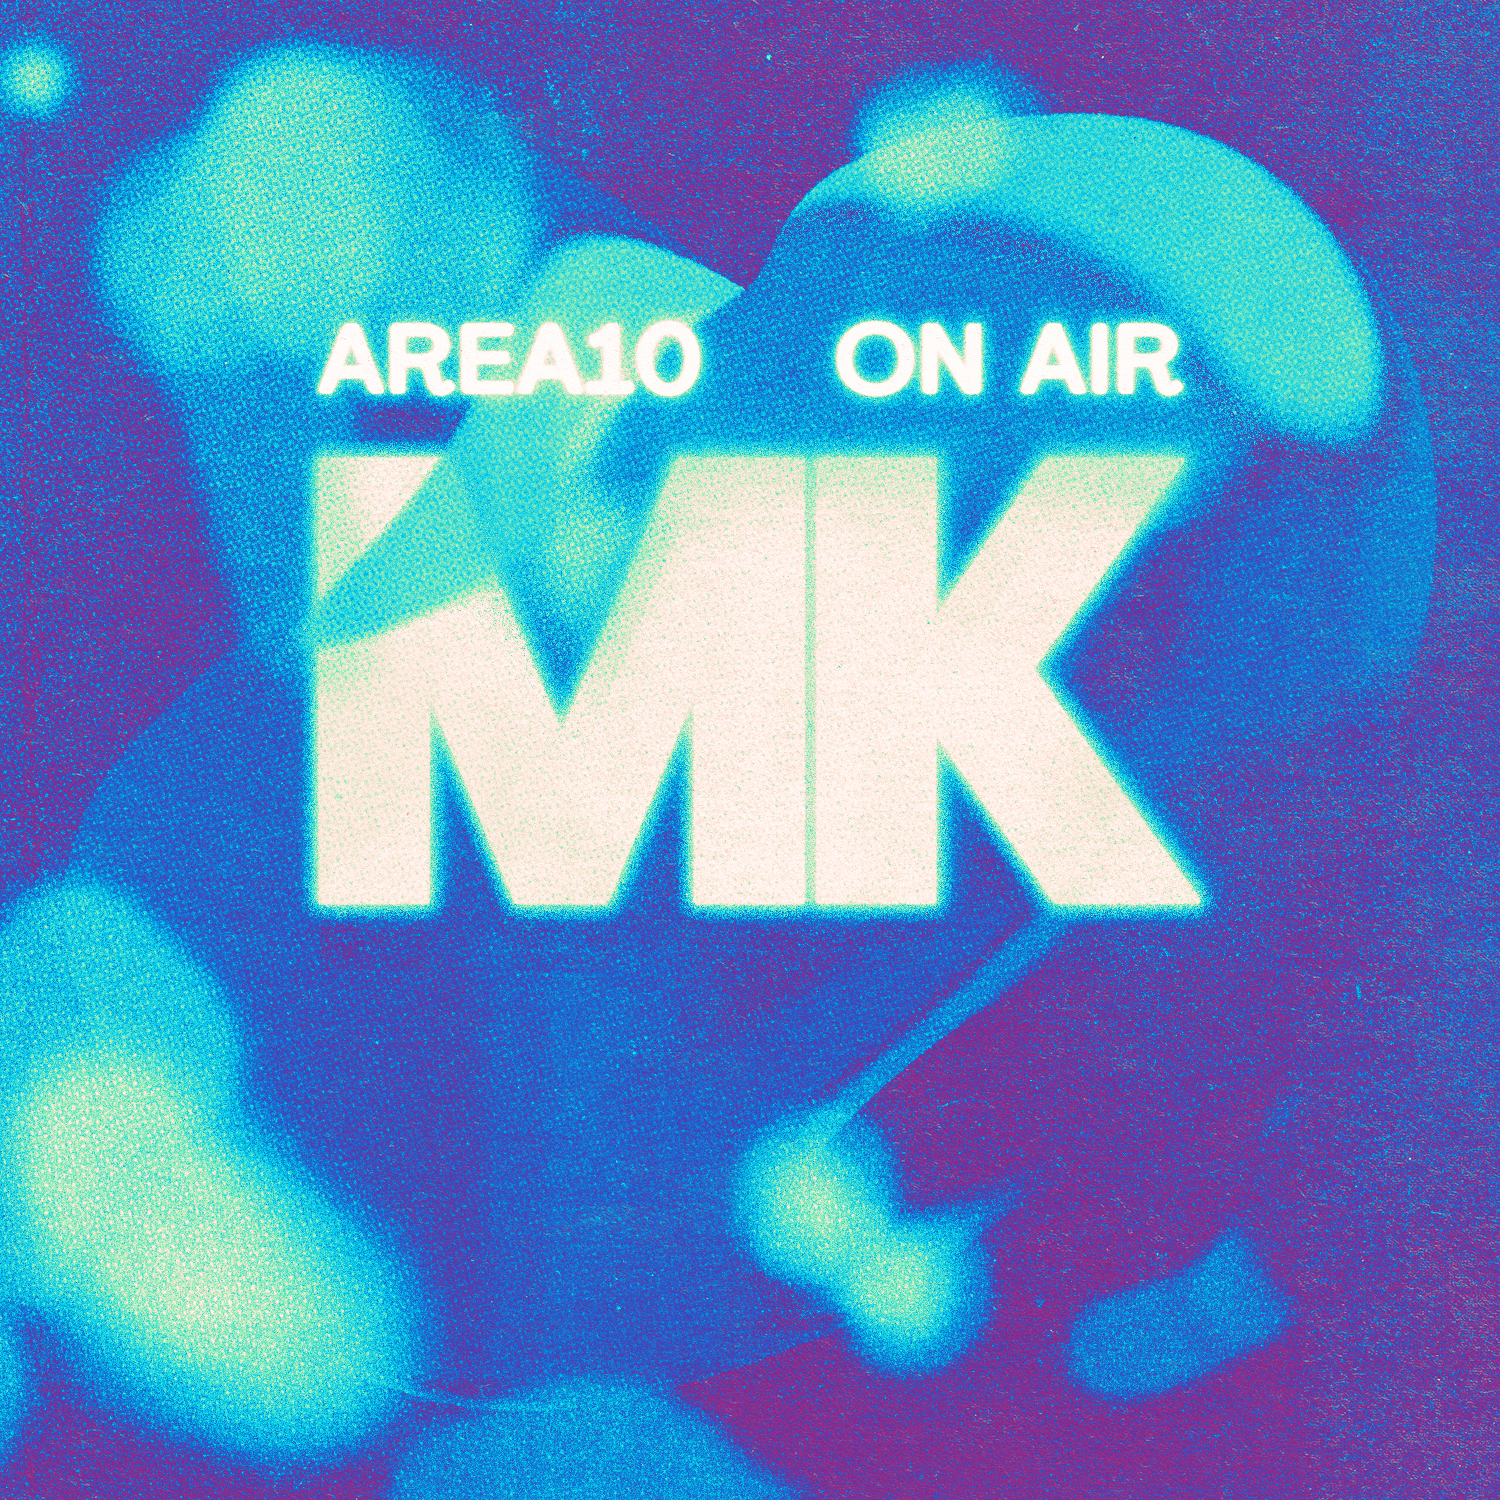 Area 10 On Air